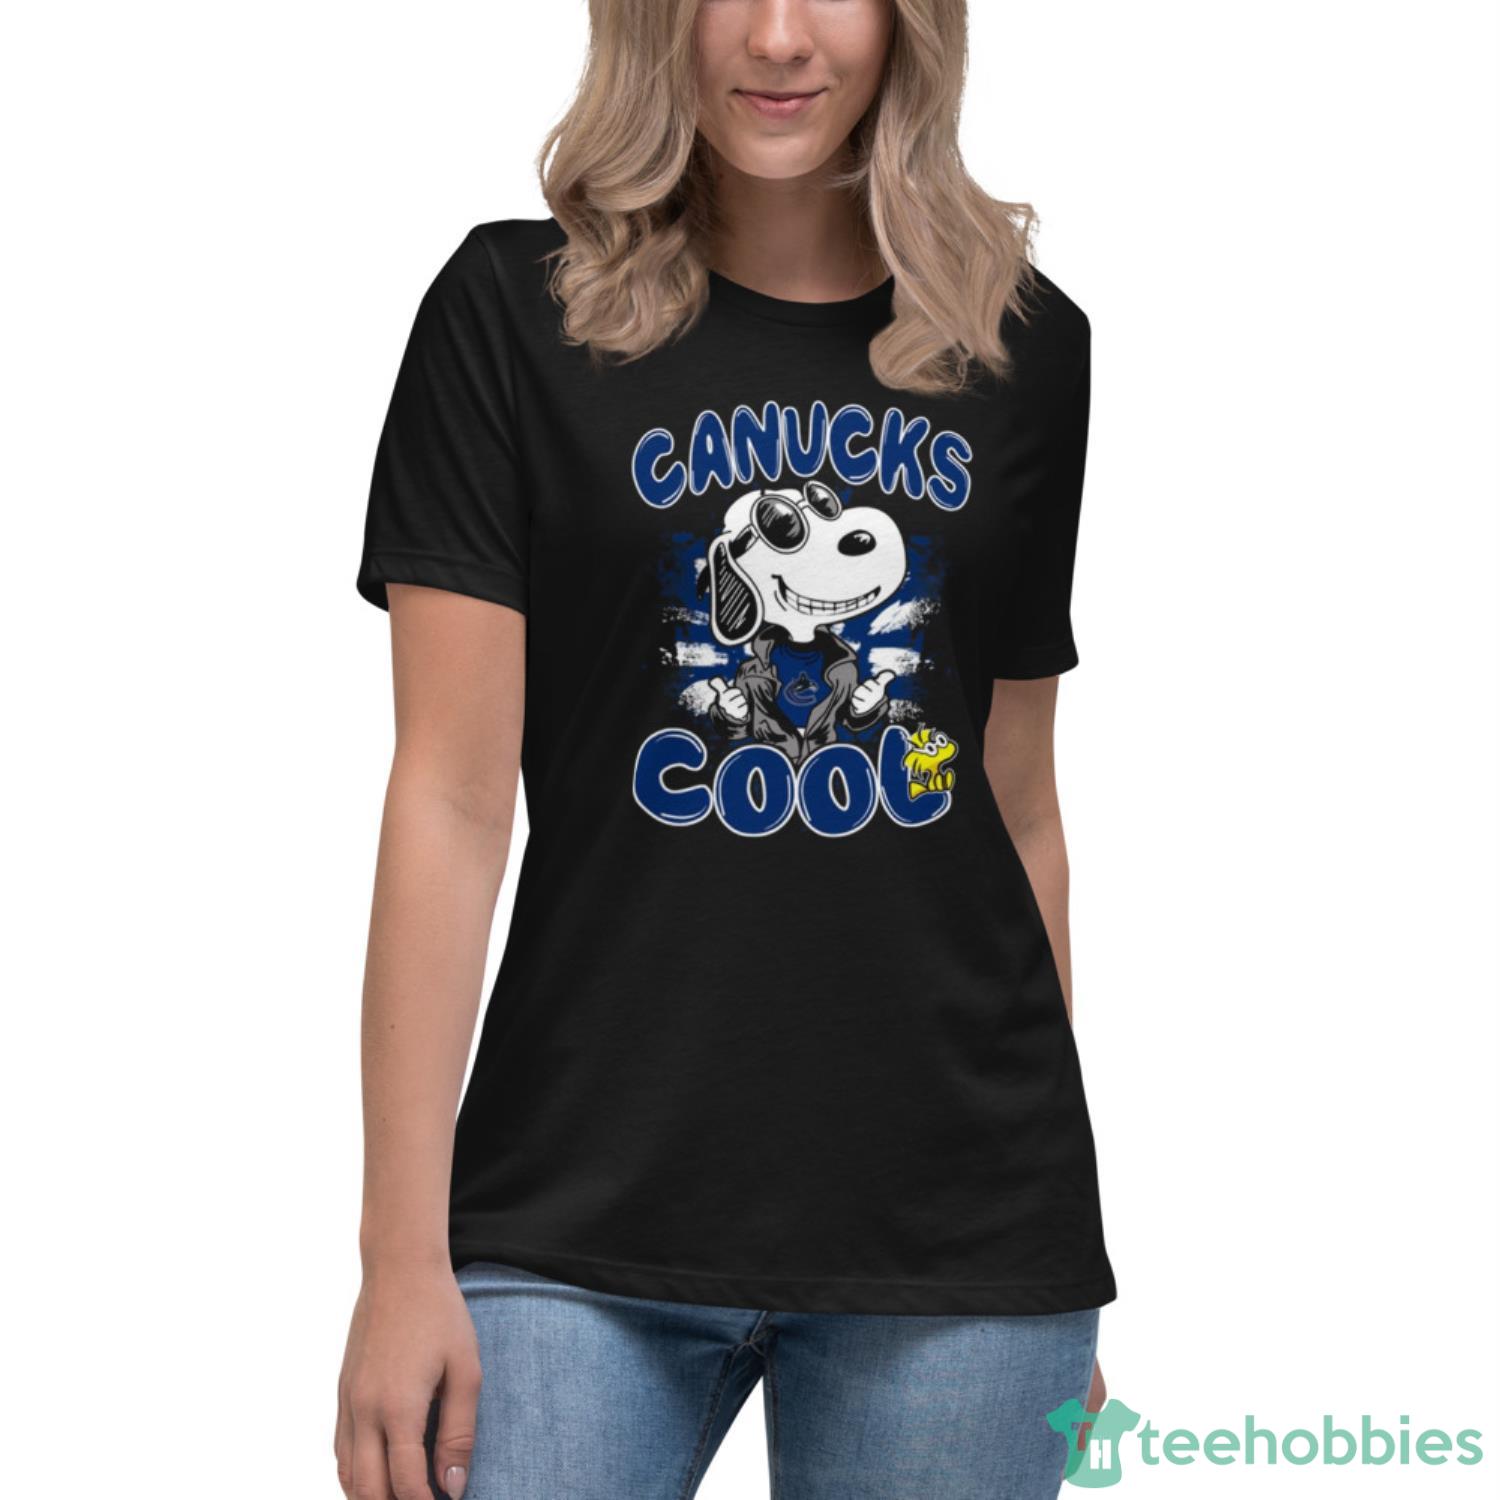 NHL Hockey Vancouver Canucks Cool Snoopy Shirt T Shirt - Womens Relaxed Short Sleeve Jersey Tee